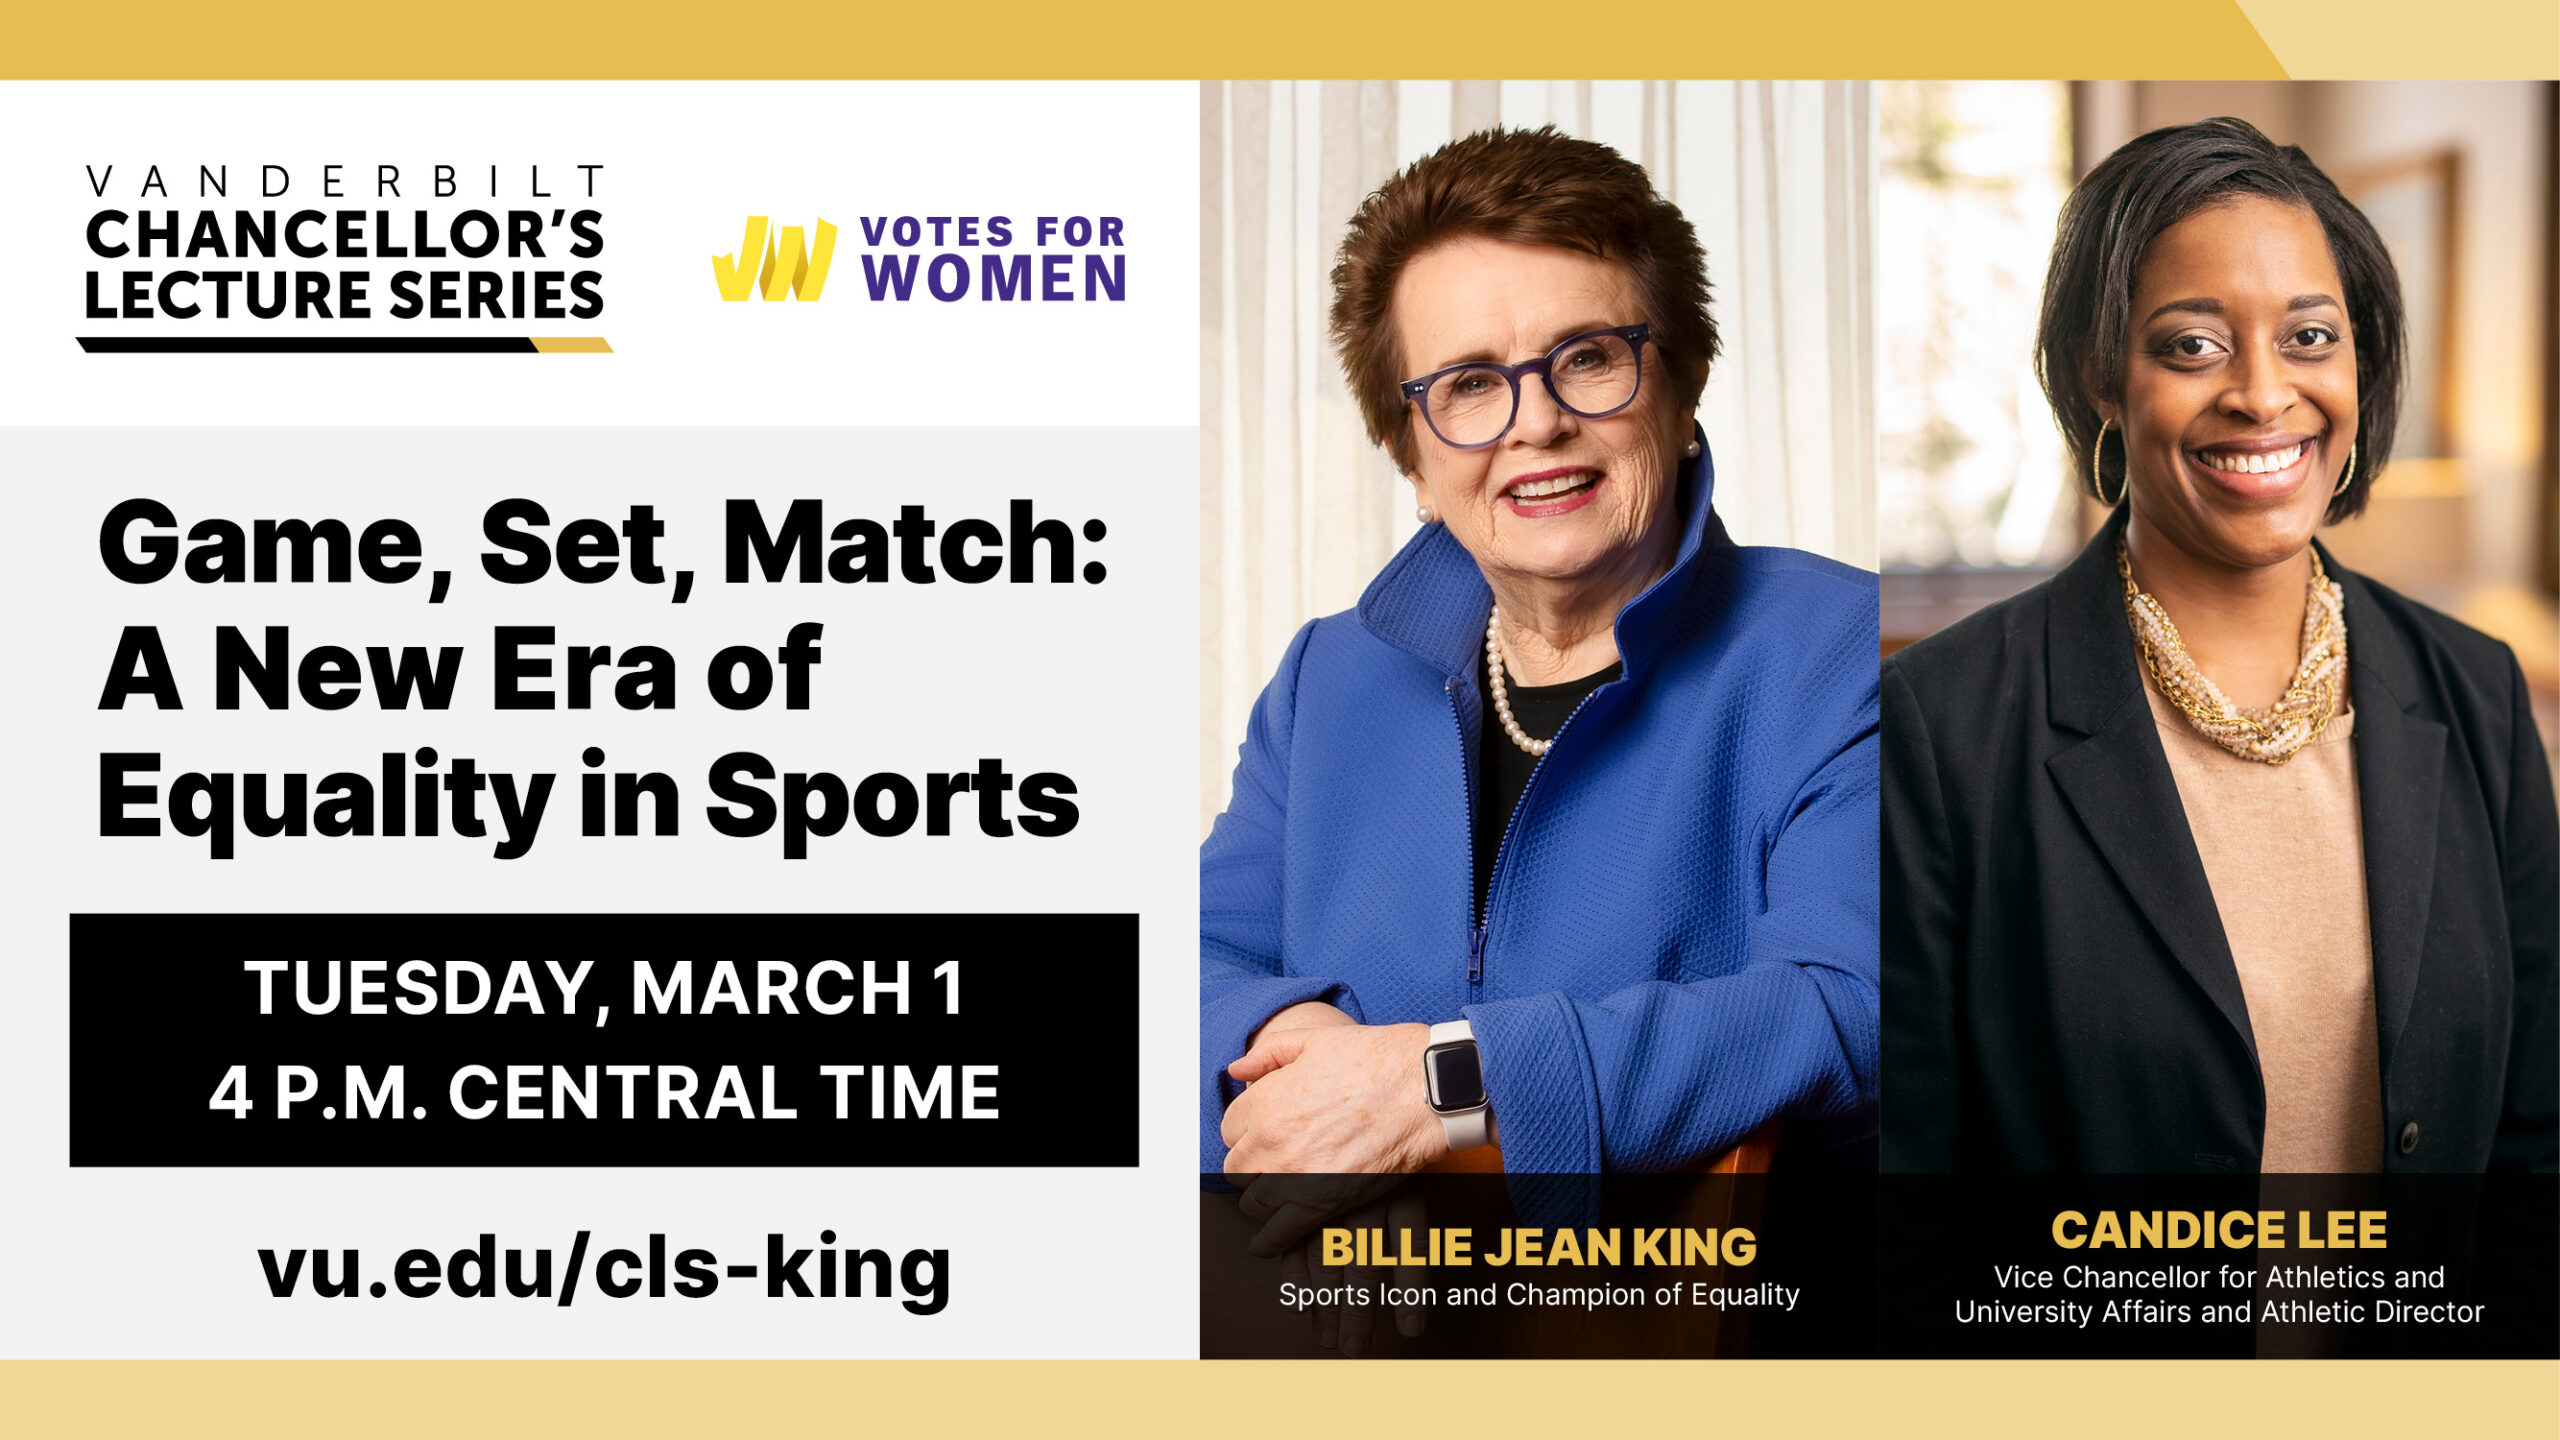 WATCH: Billie Jean King and Candice Lee discuss progress made and challenges remaining for equality in sports